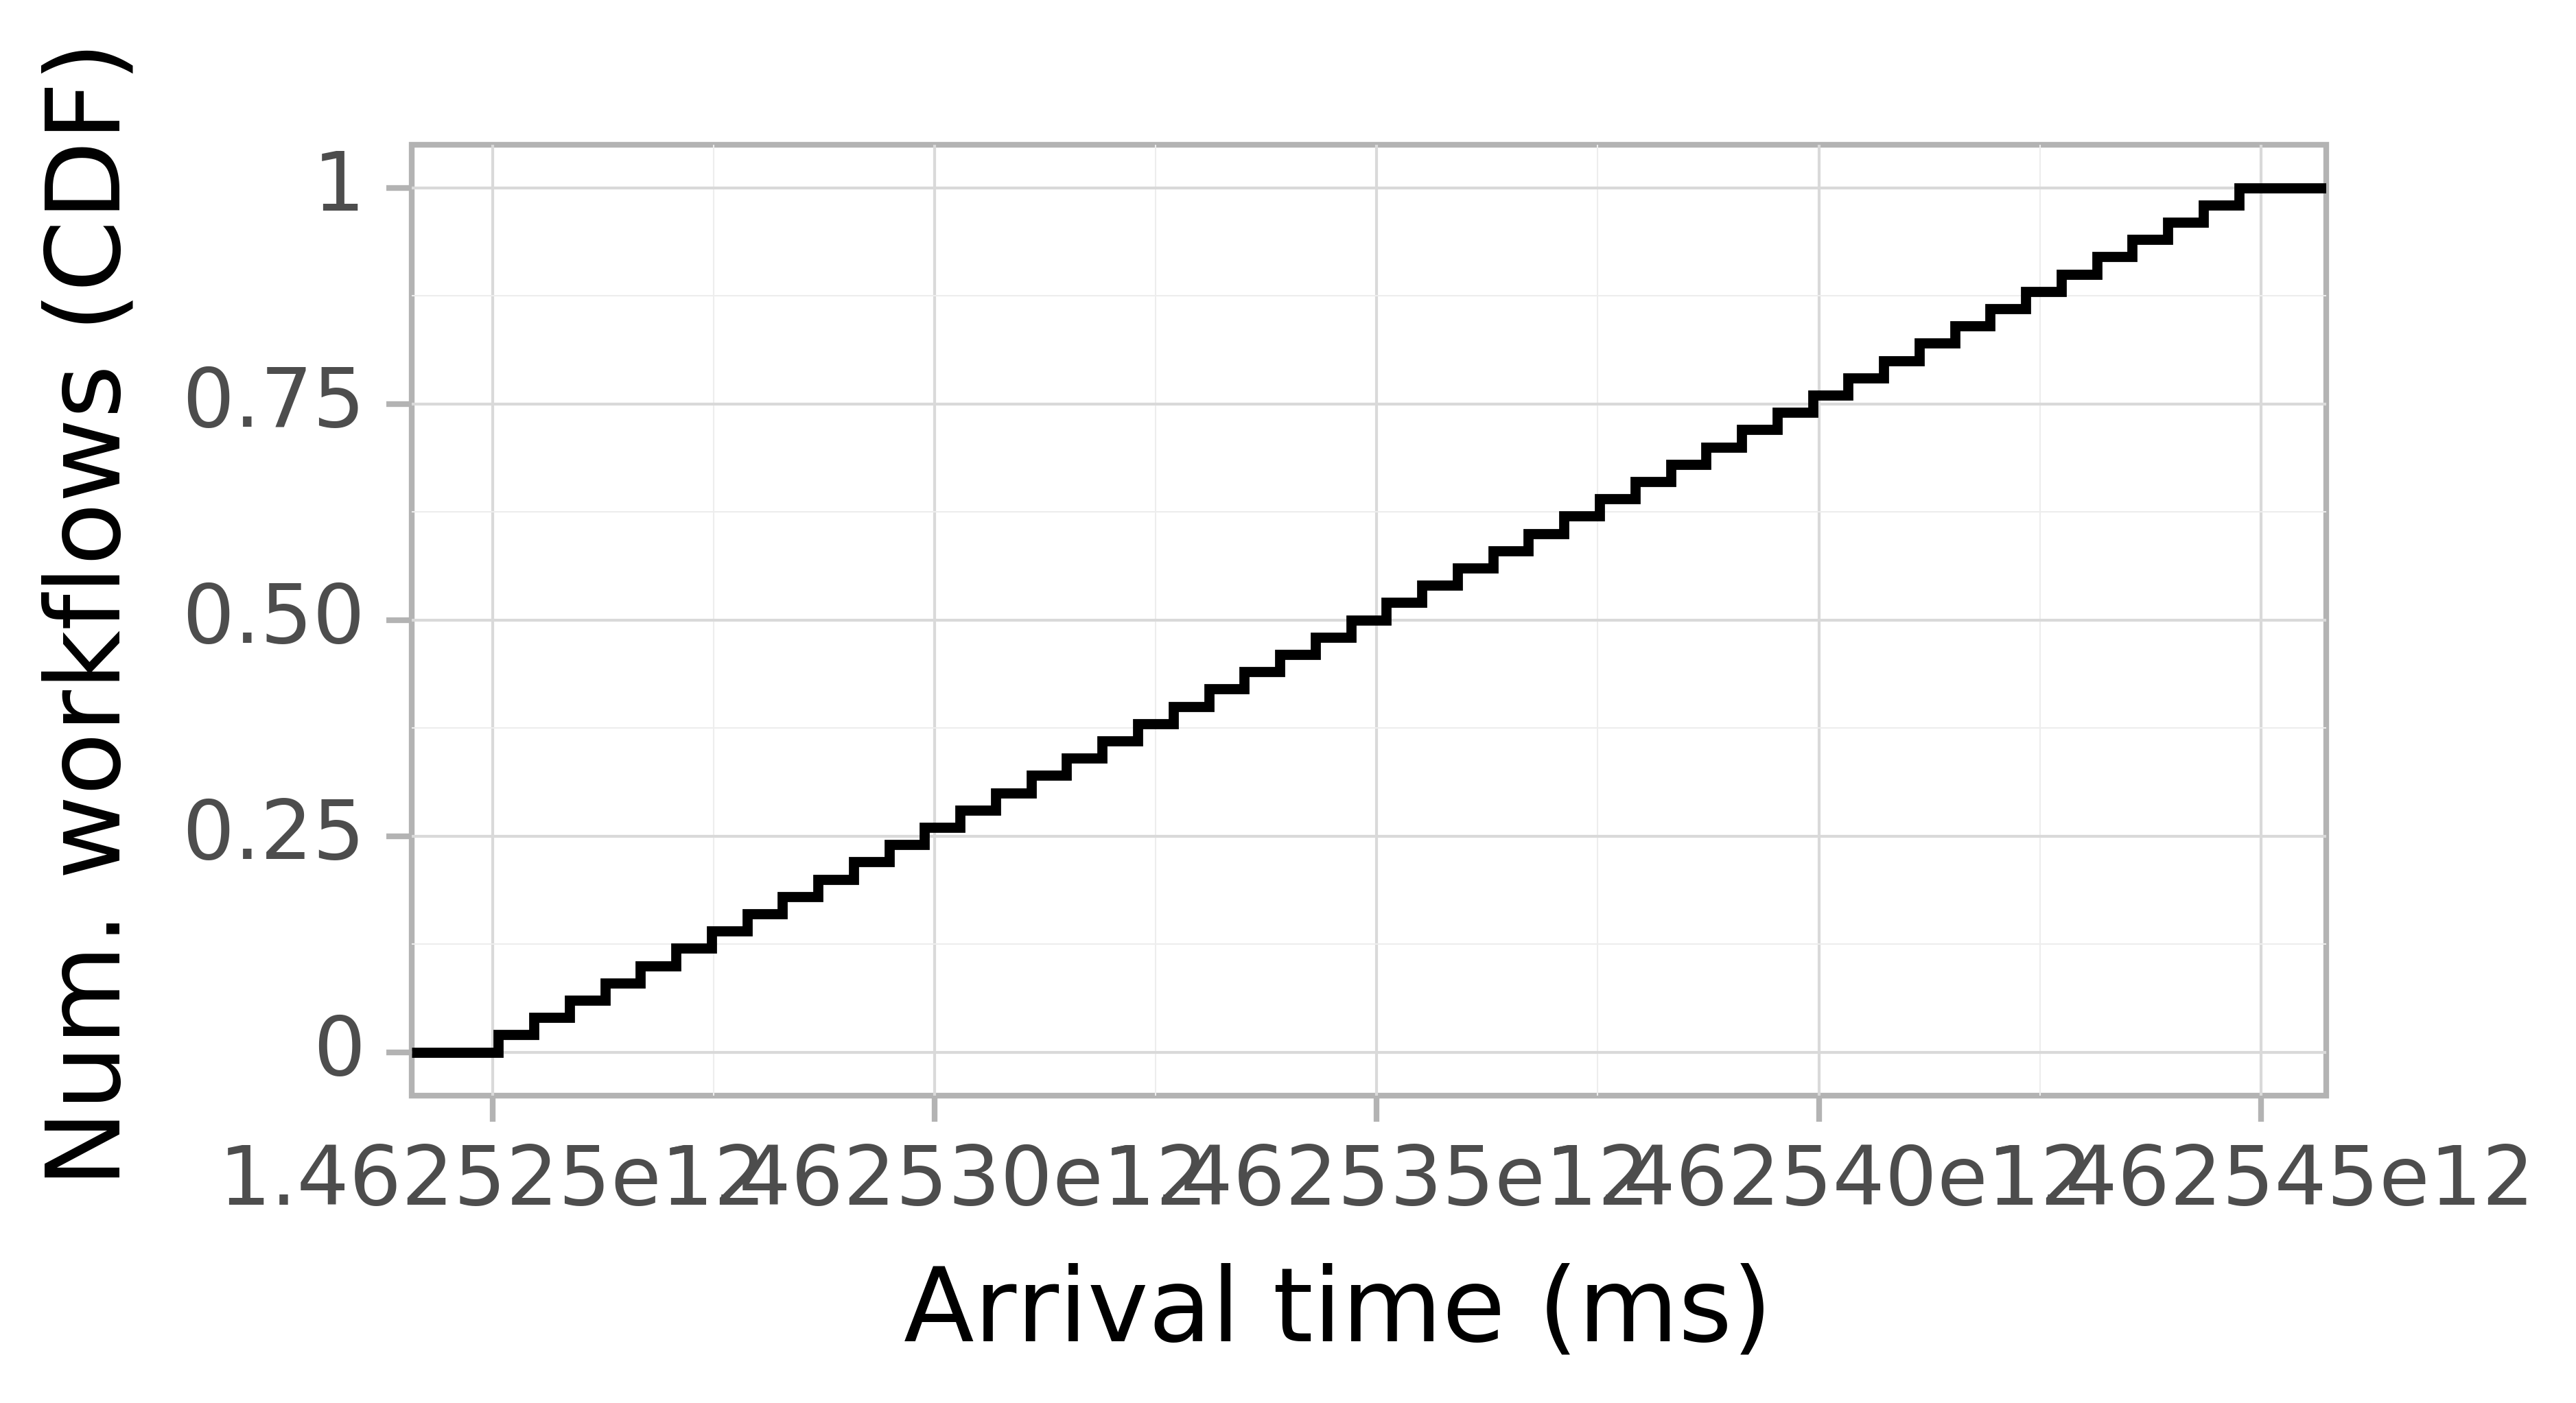 Job arrival CDF graph for the askalon-new_ee53 trace.